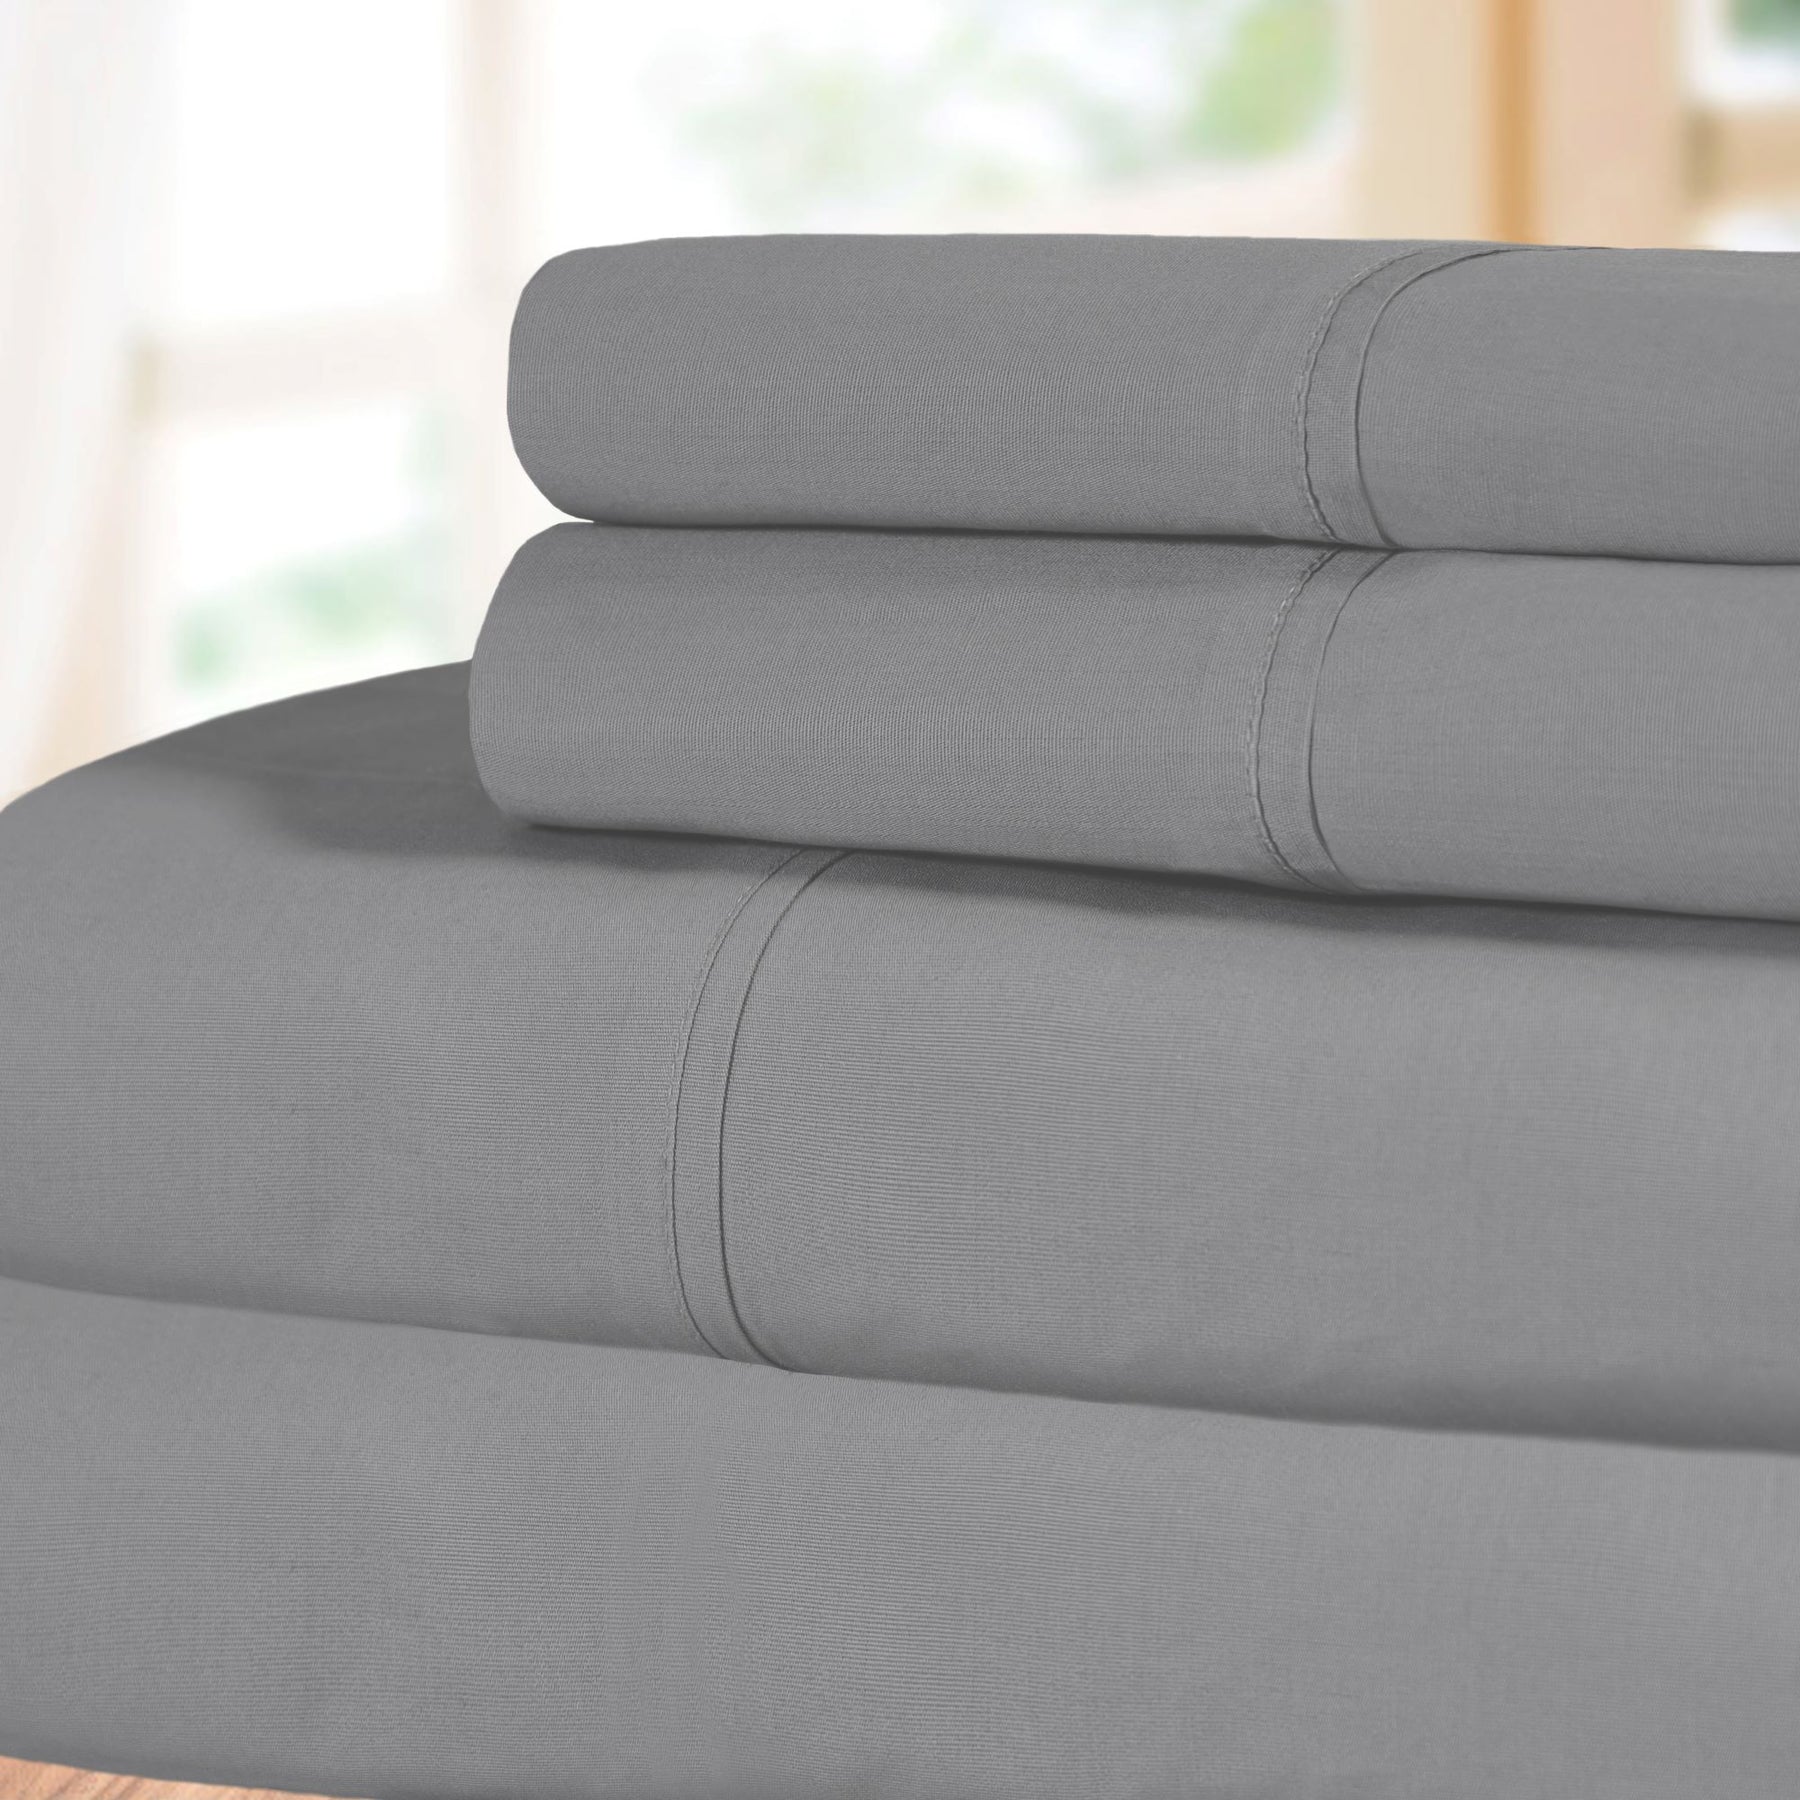 Superior 100% Cotton Percale 300 Thread Count Sheet Set - Smoked Pearl